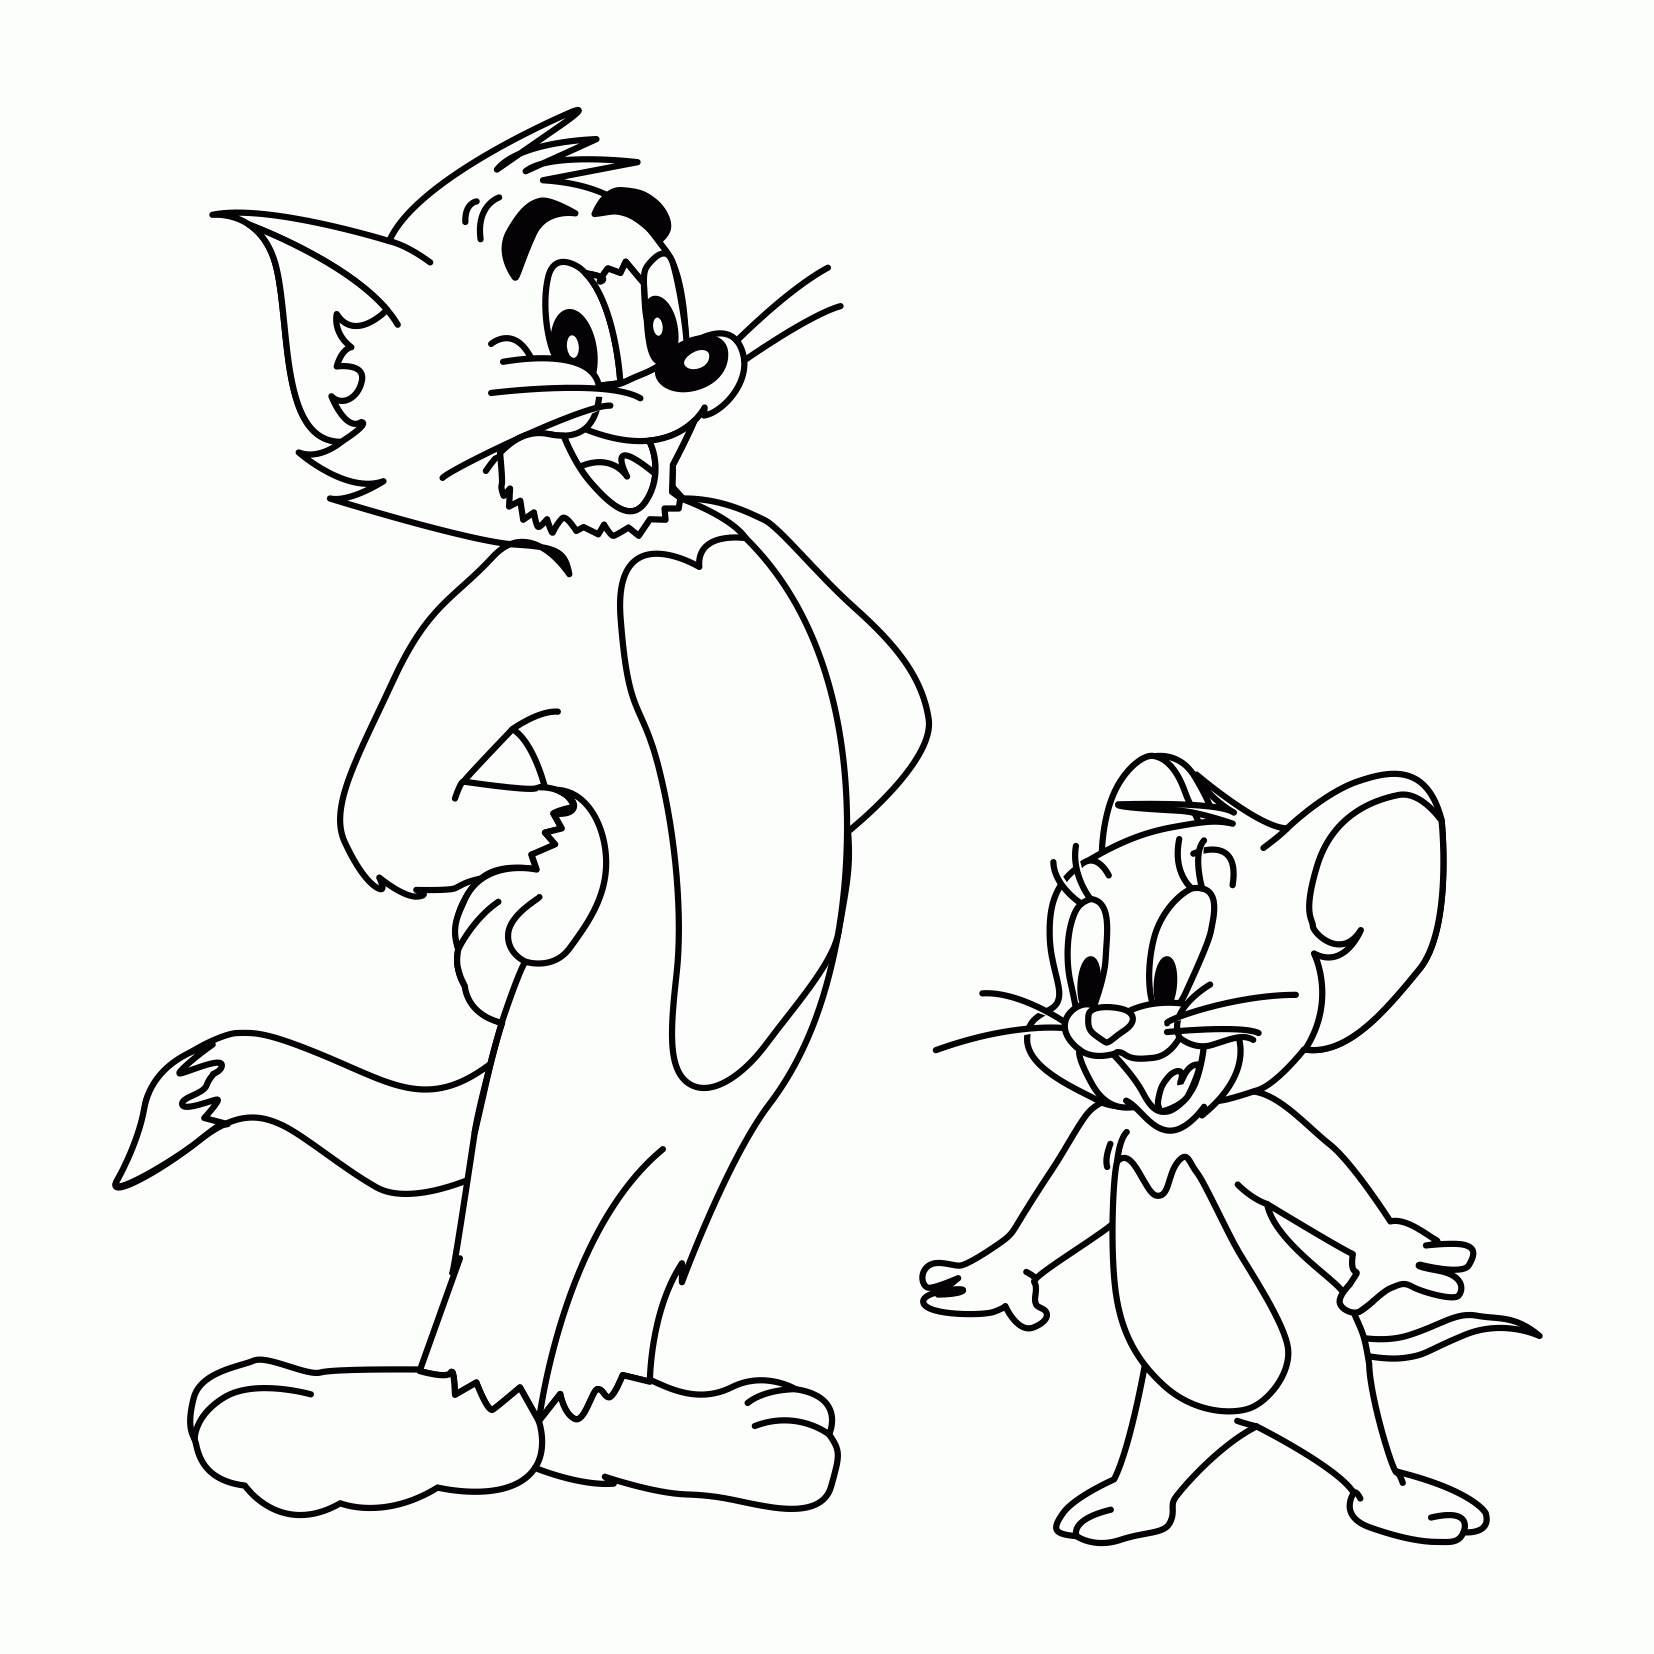 Tom+And+Jerry+Coloring+Pages | Tom And Jerry | Coloring Book - Free Printable Tom And Jerry Coloring Pages